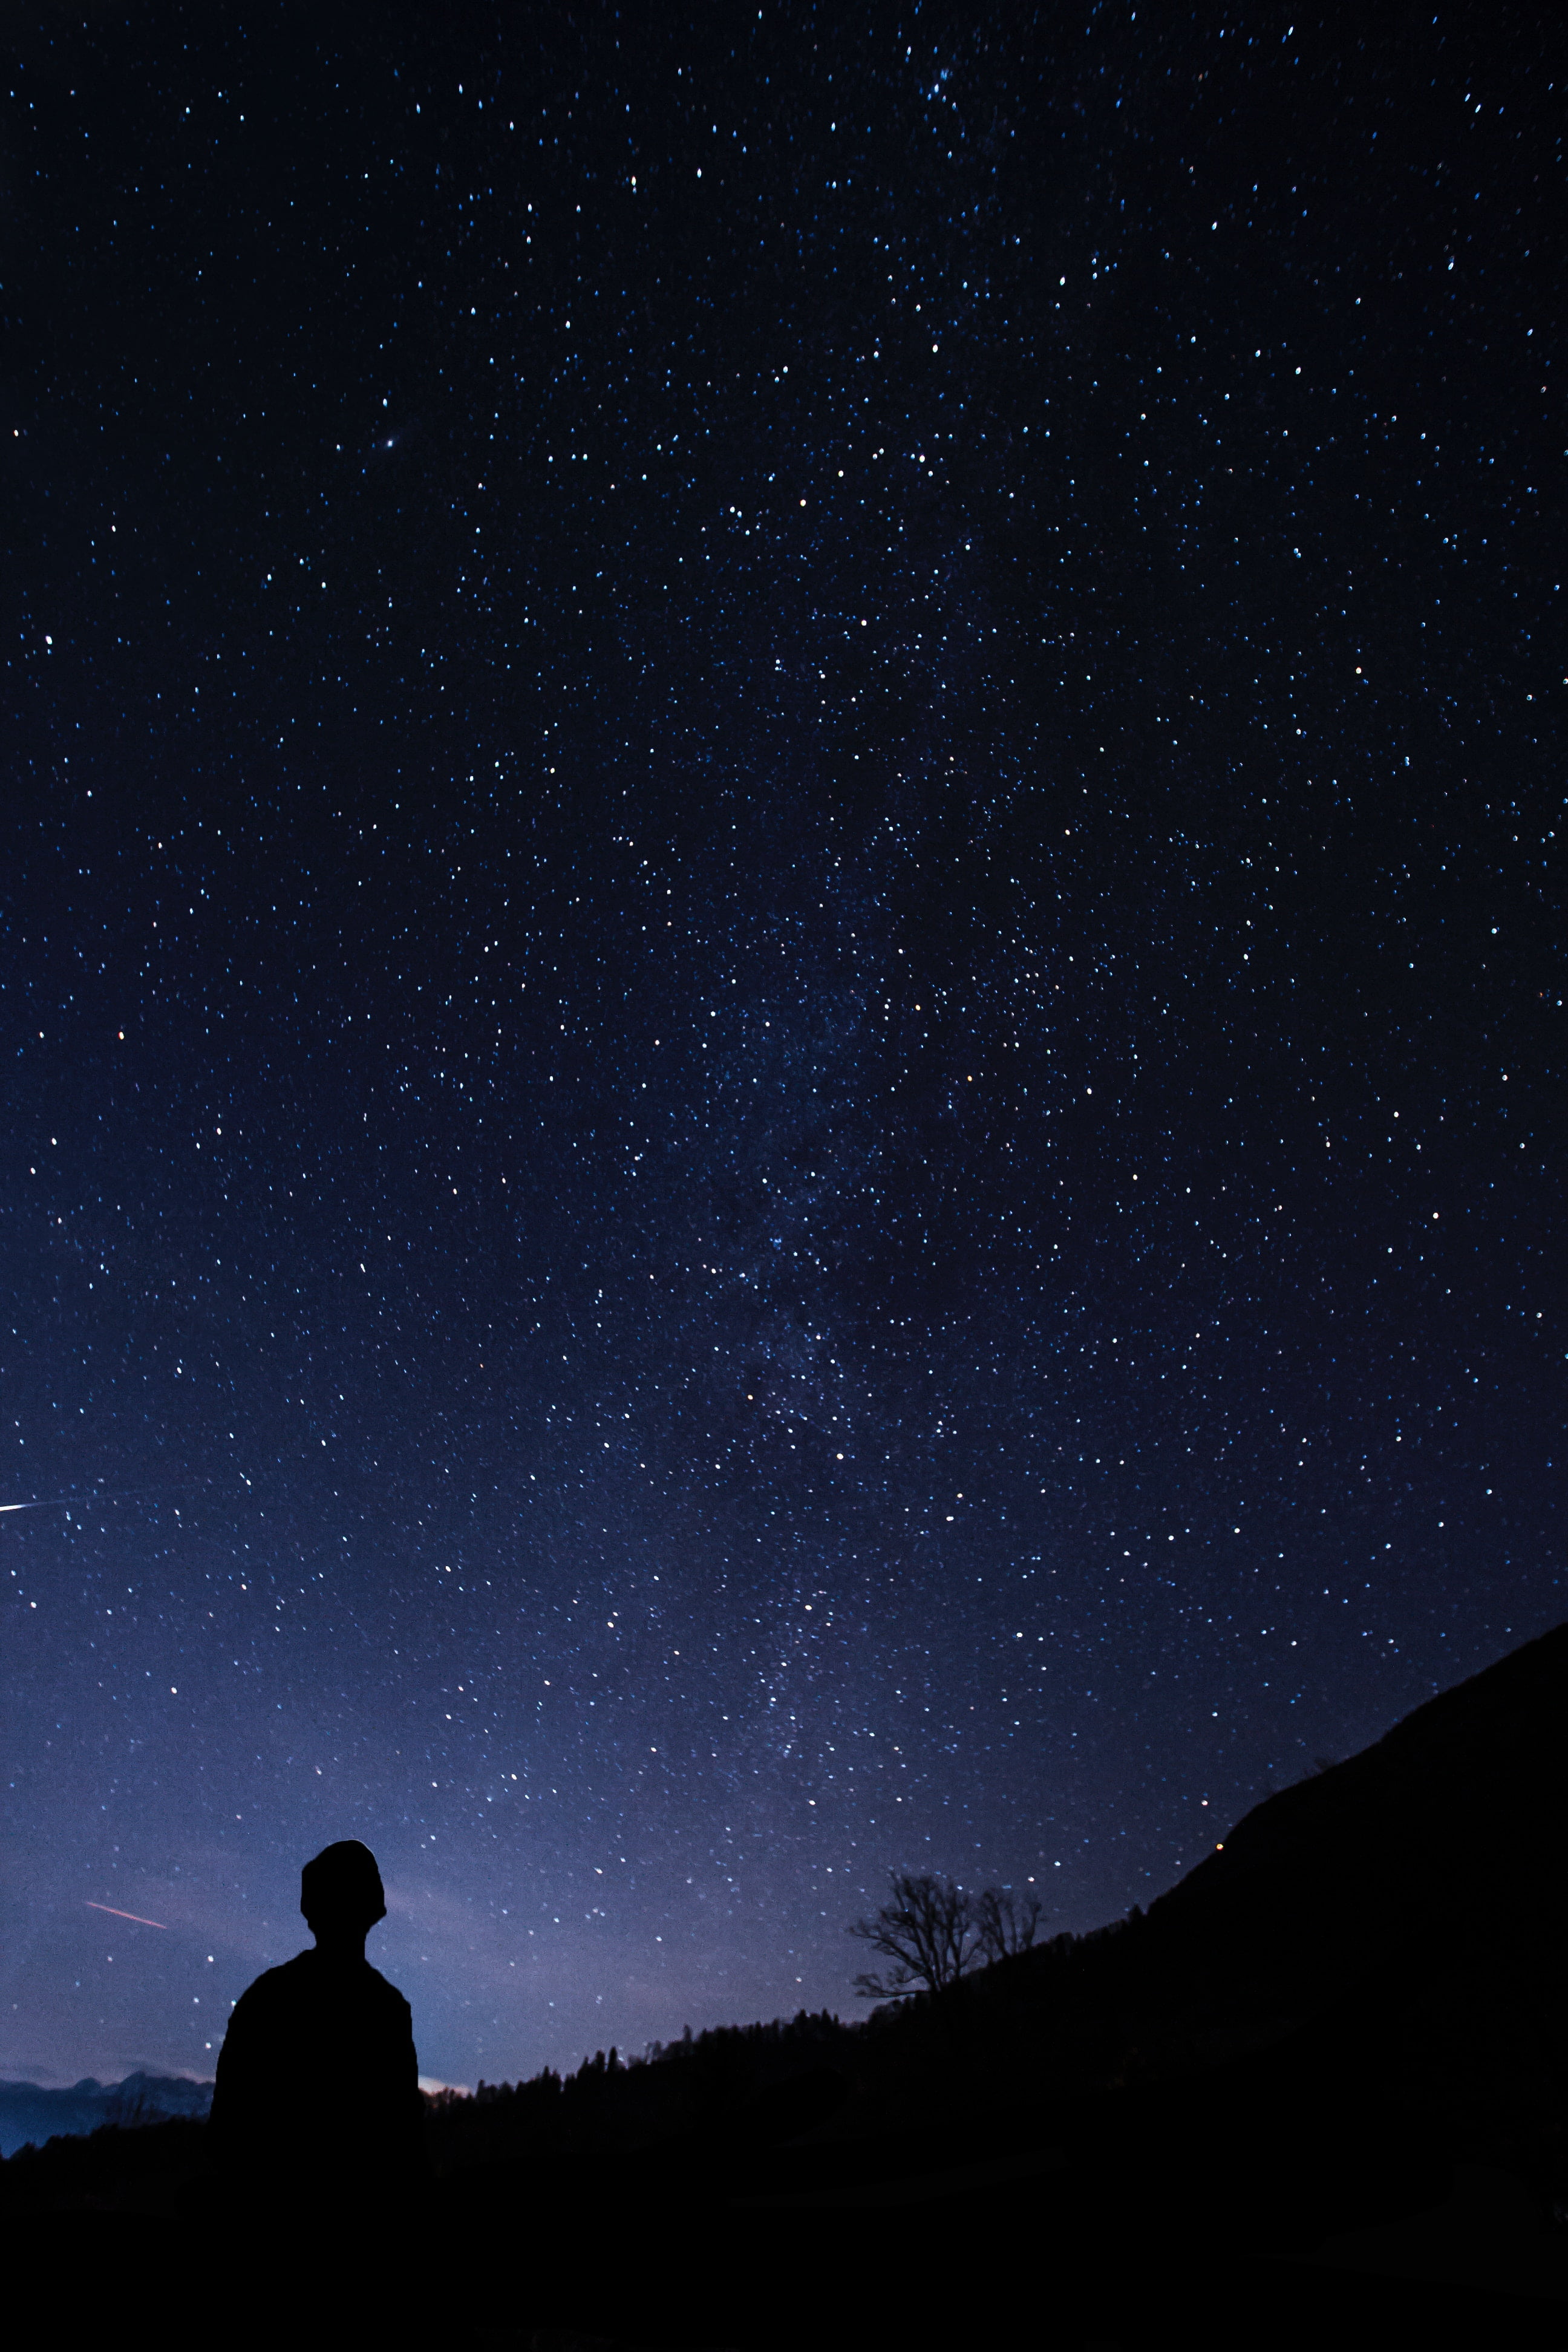 silhouette of human, Silhouette, Starry sky, Man